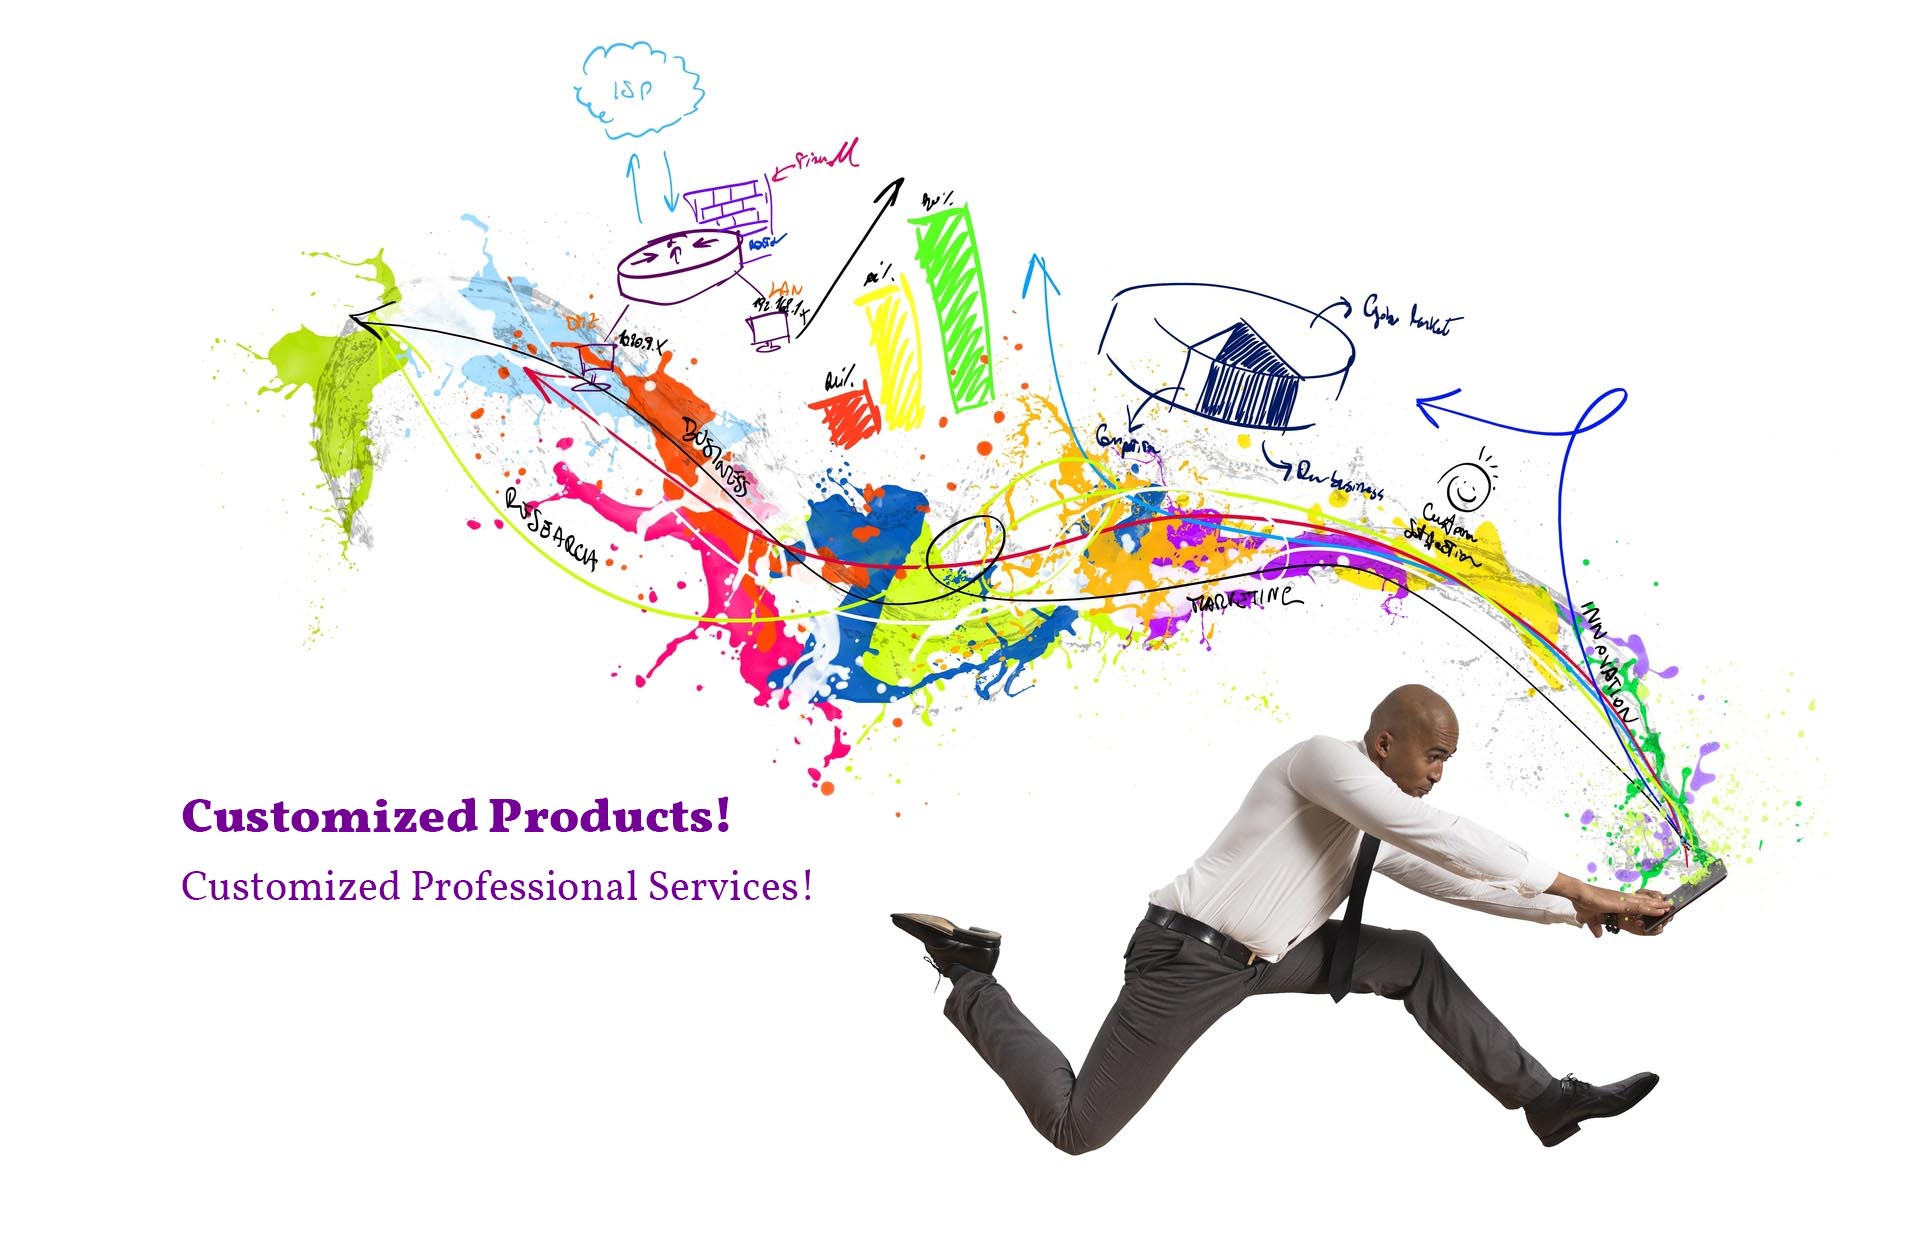 Customized Products! Customized Professional Services!